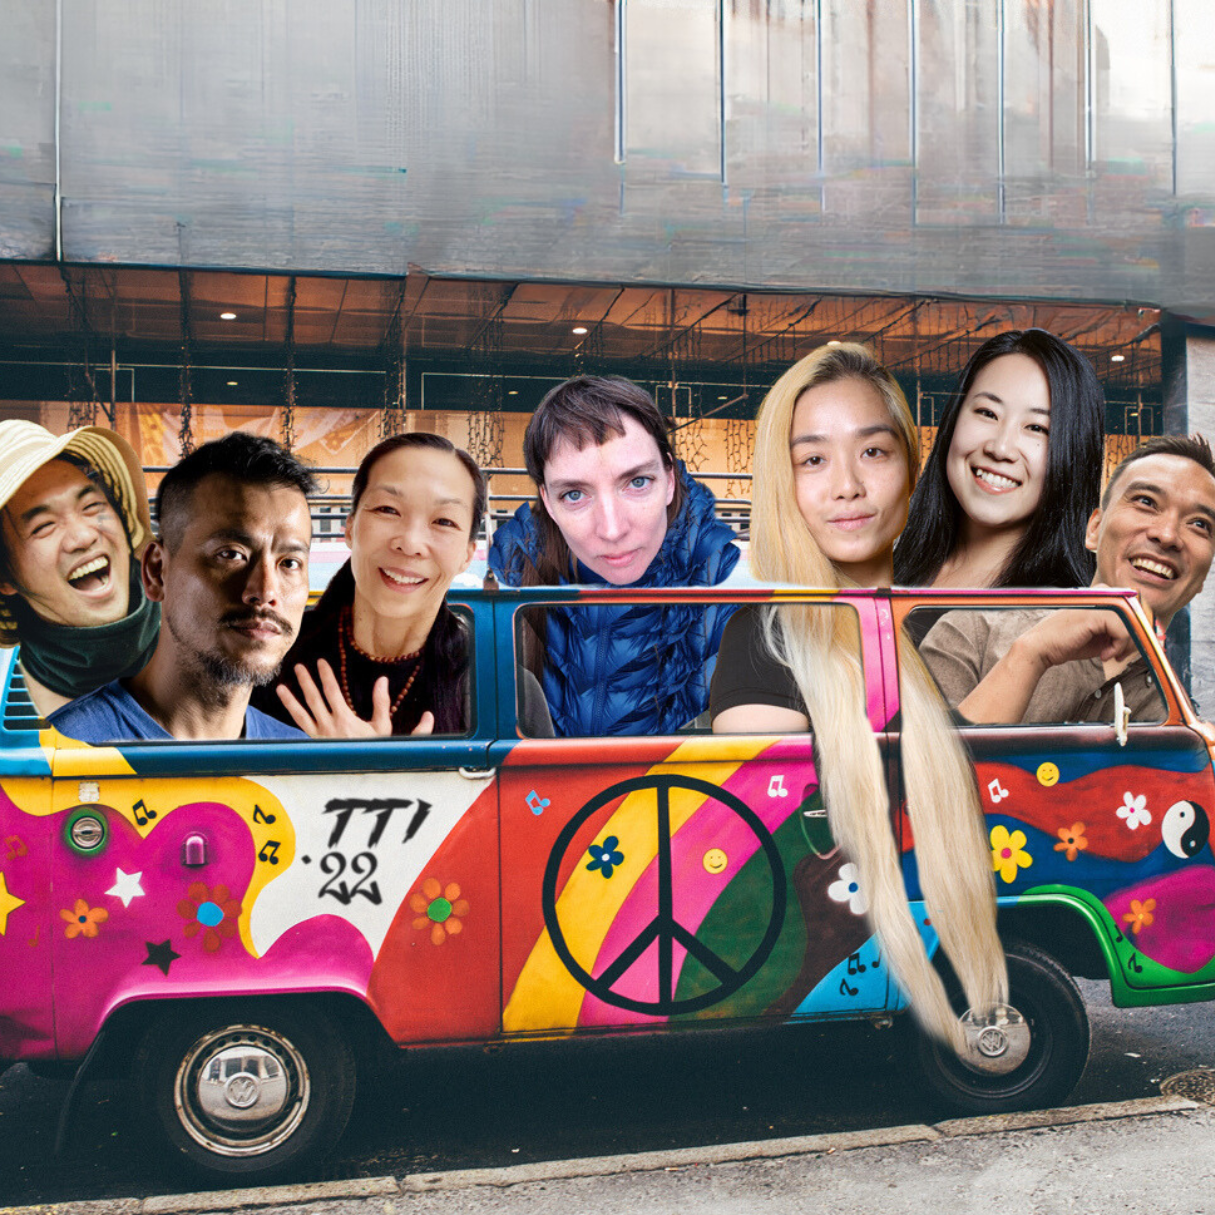 Seven artists ride in a colourful van with peace signs, rainbows and stars.